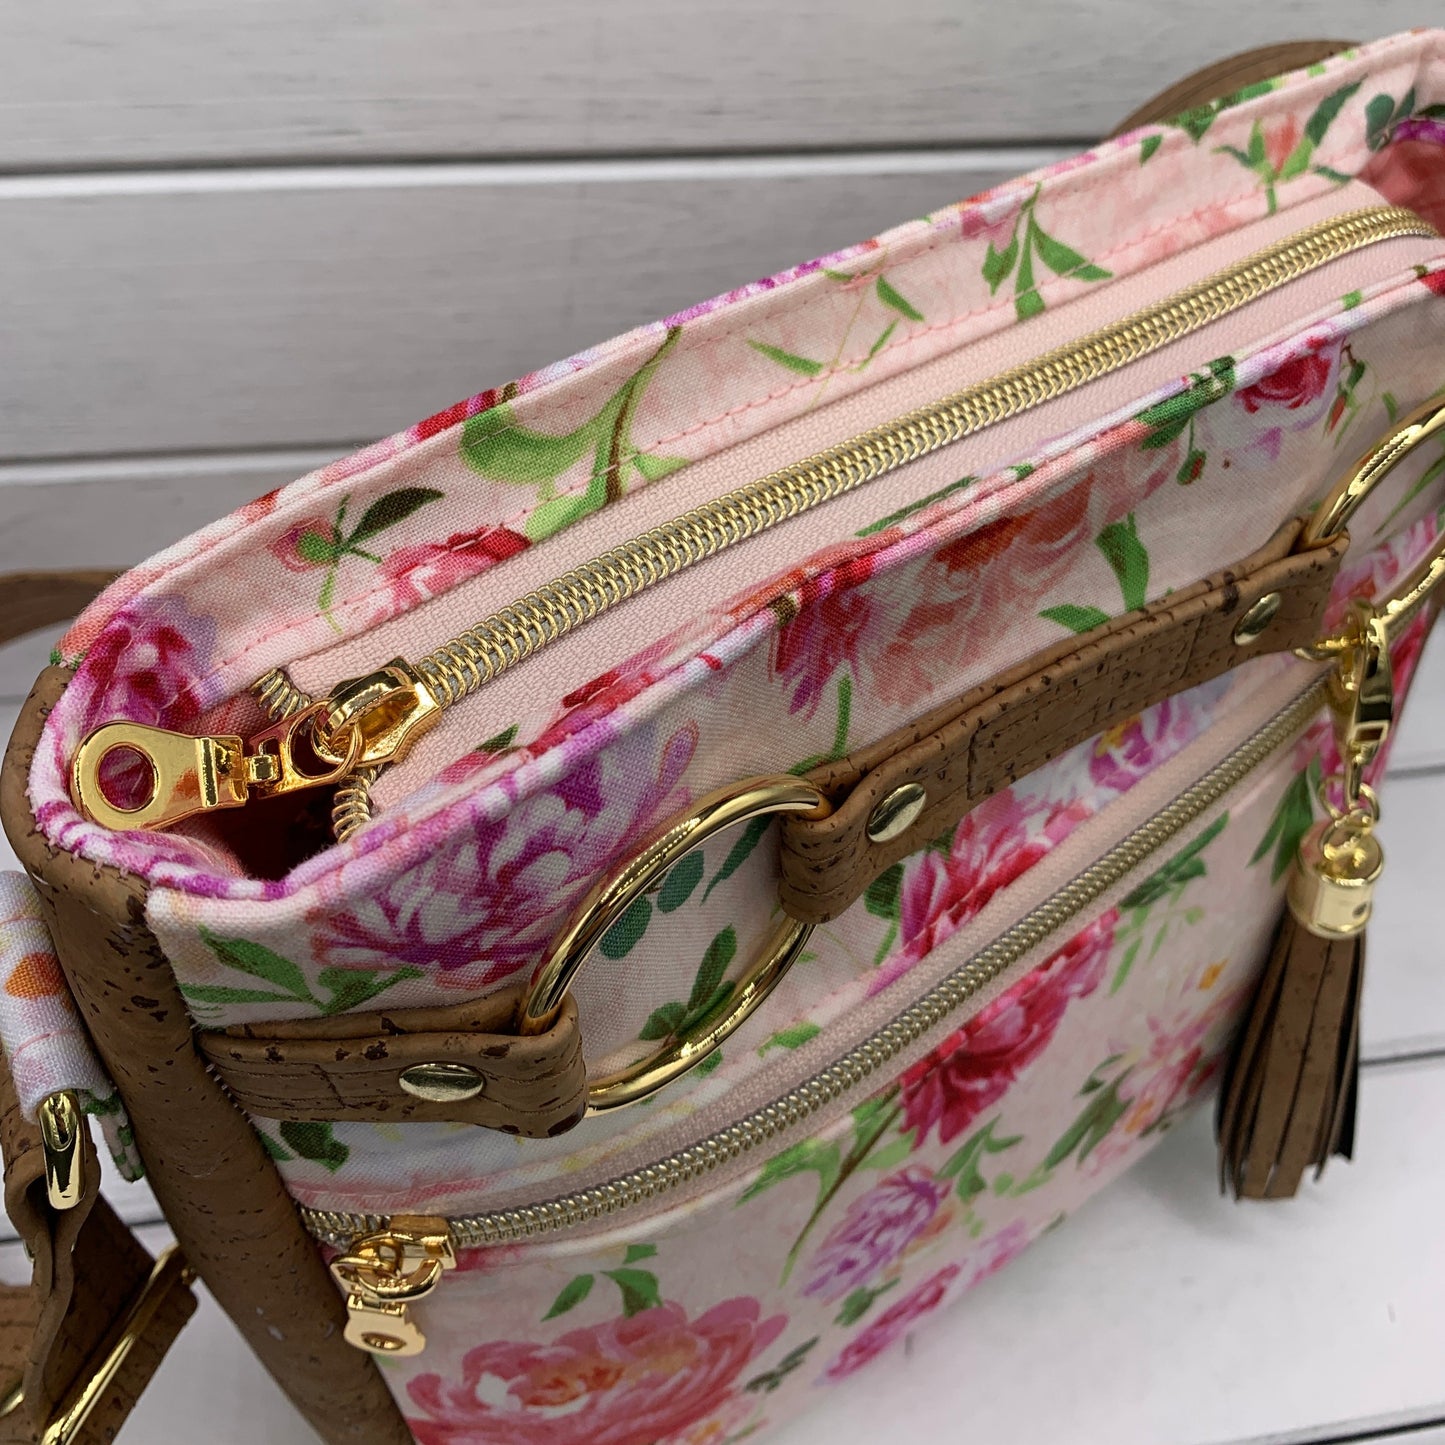 Momexa Crossbody Bag - Pink Floral Cotton and Brown Cork